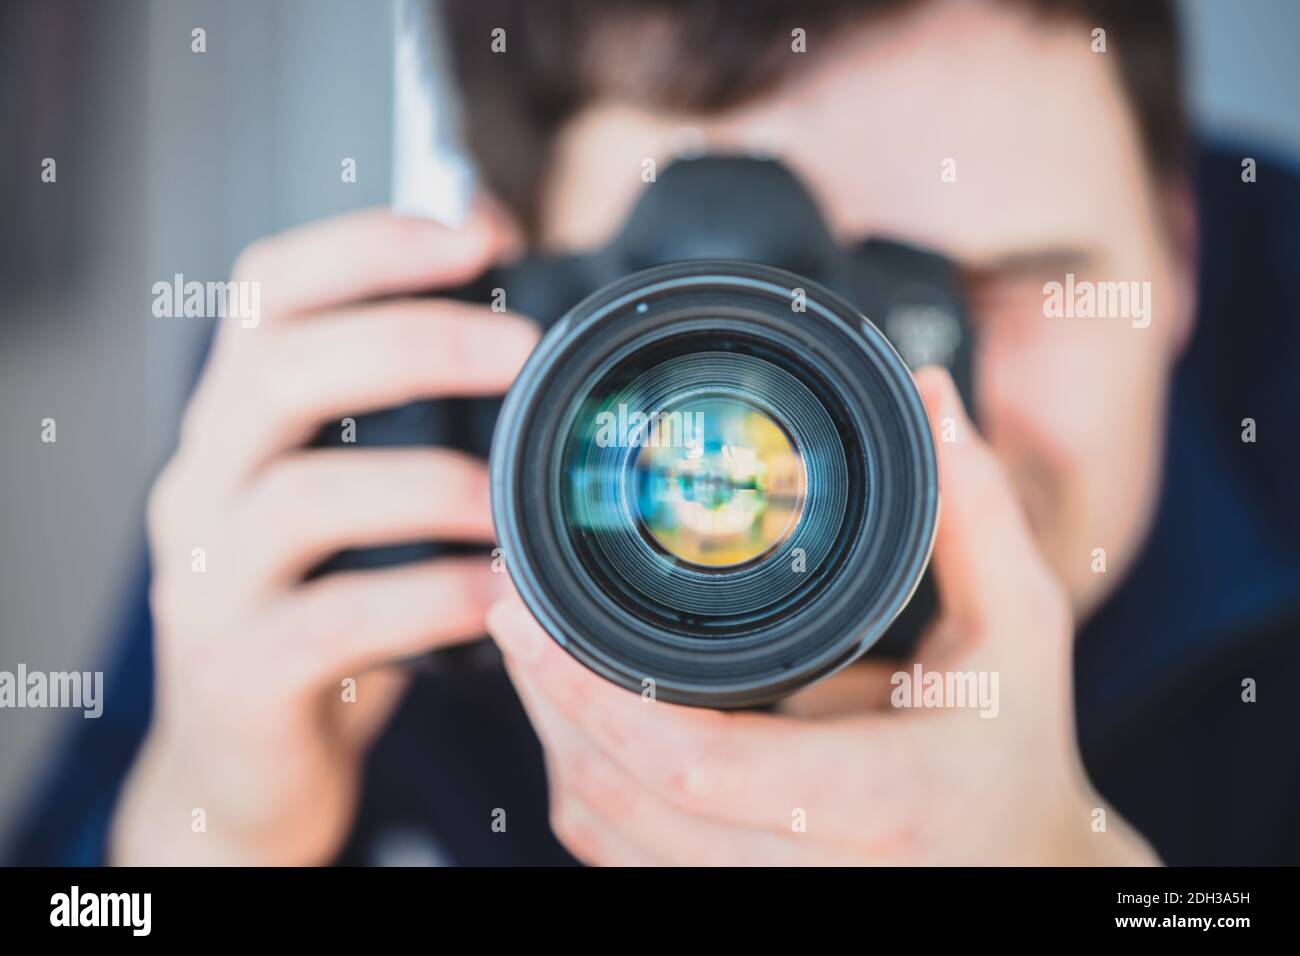 Photographer at work: Man is standing behind a professional camera on a tripod, making pictures Stock Photo